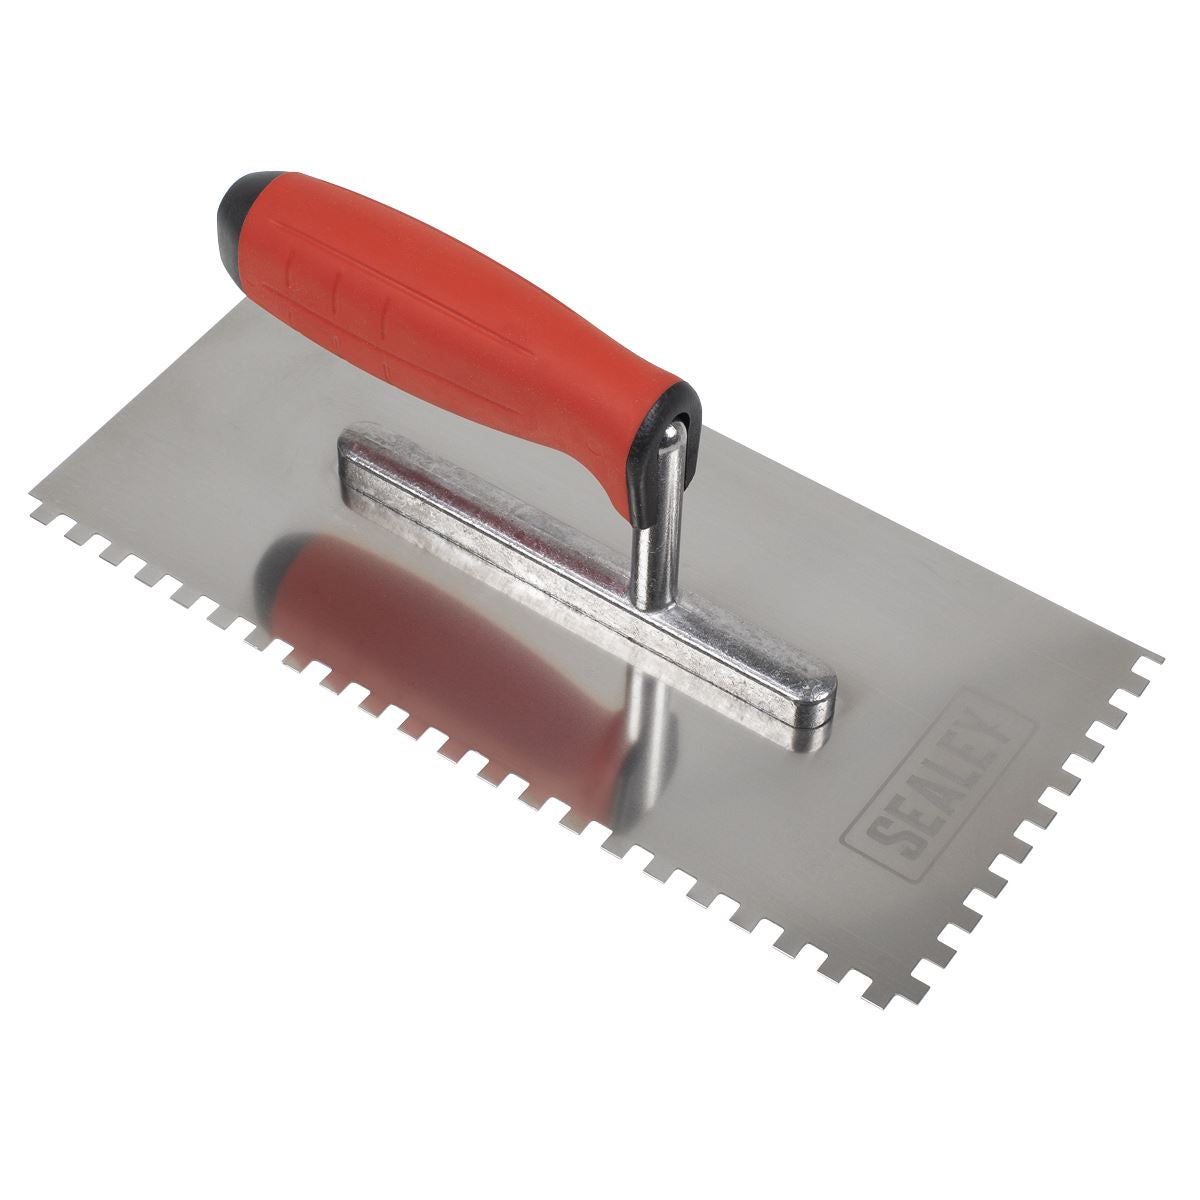 Sealey Stainless Steel 270mm Notched Trowel - Rubber Handle - 6mm